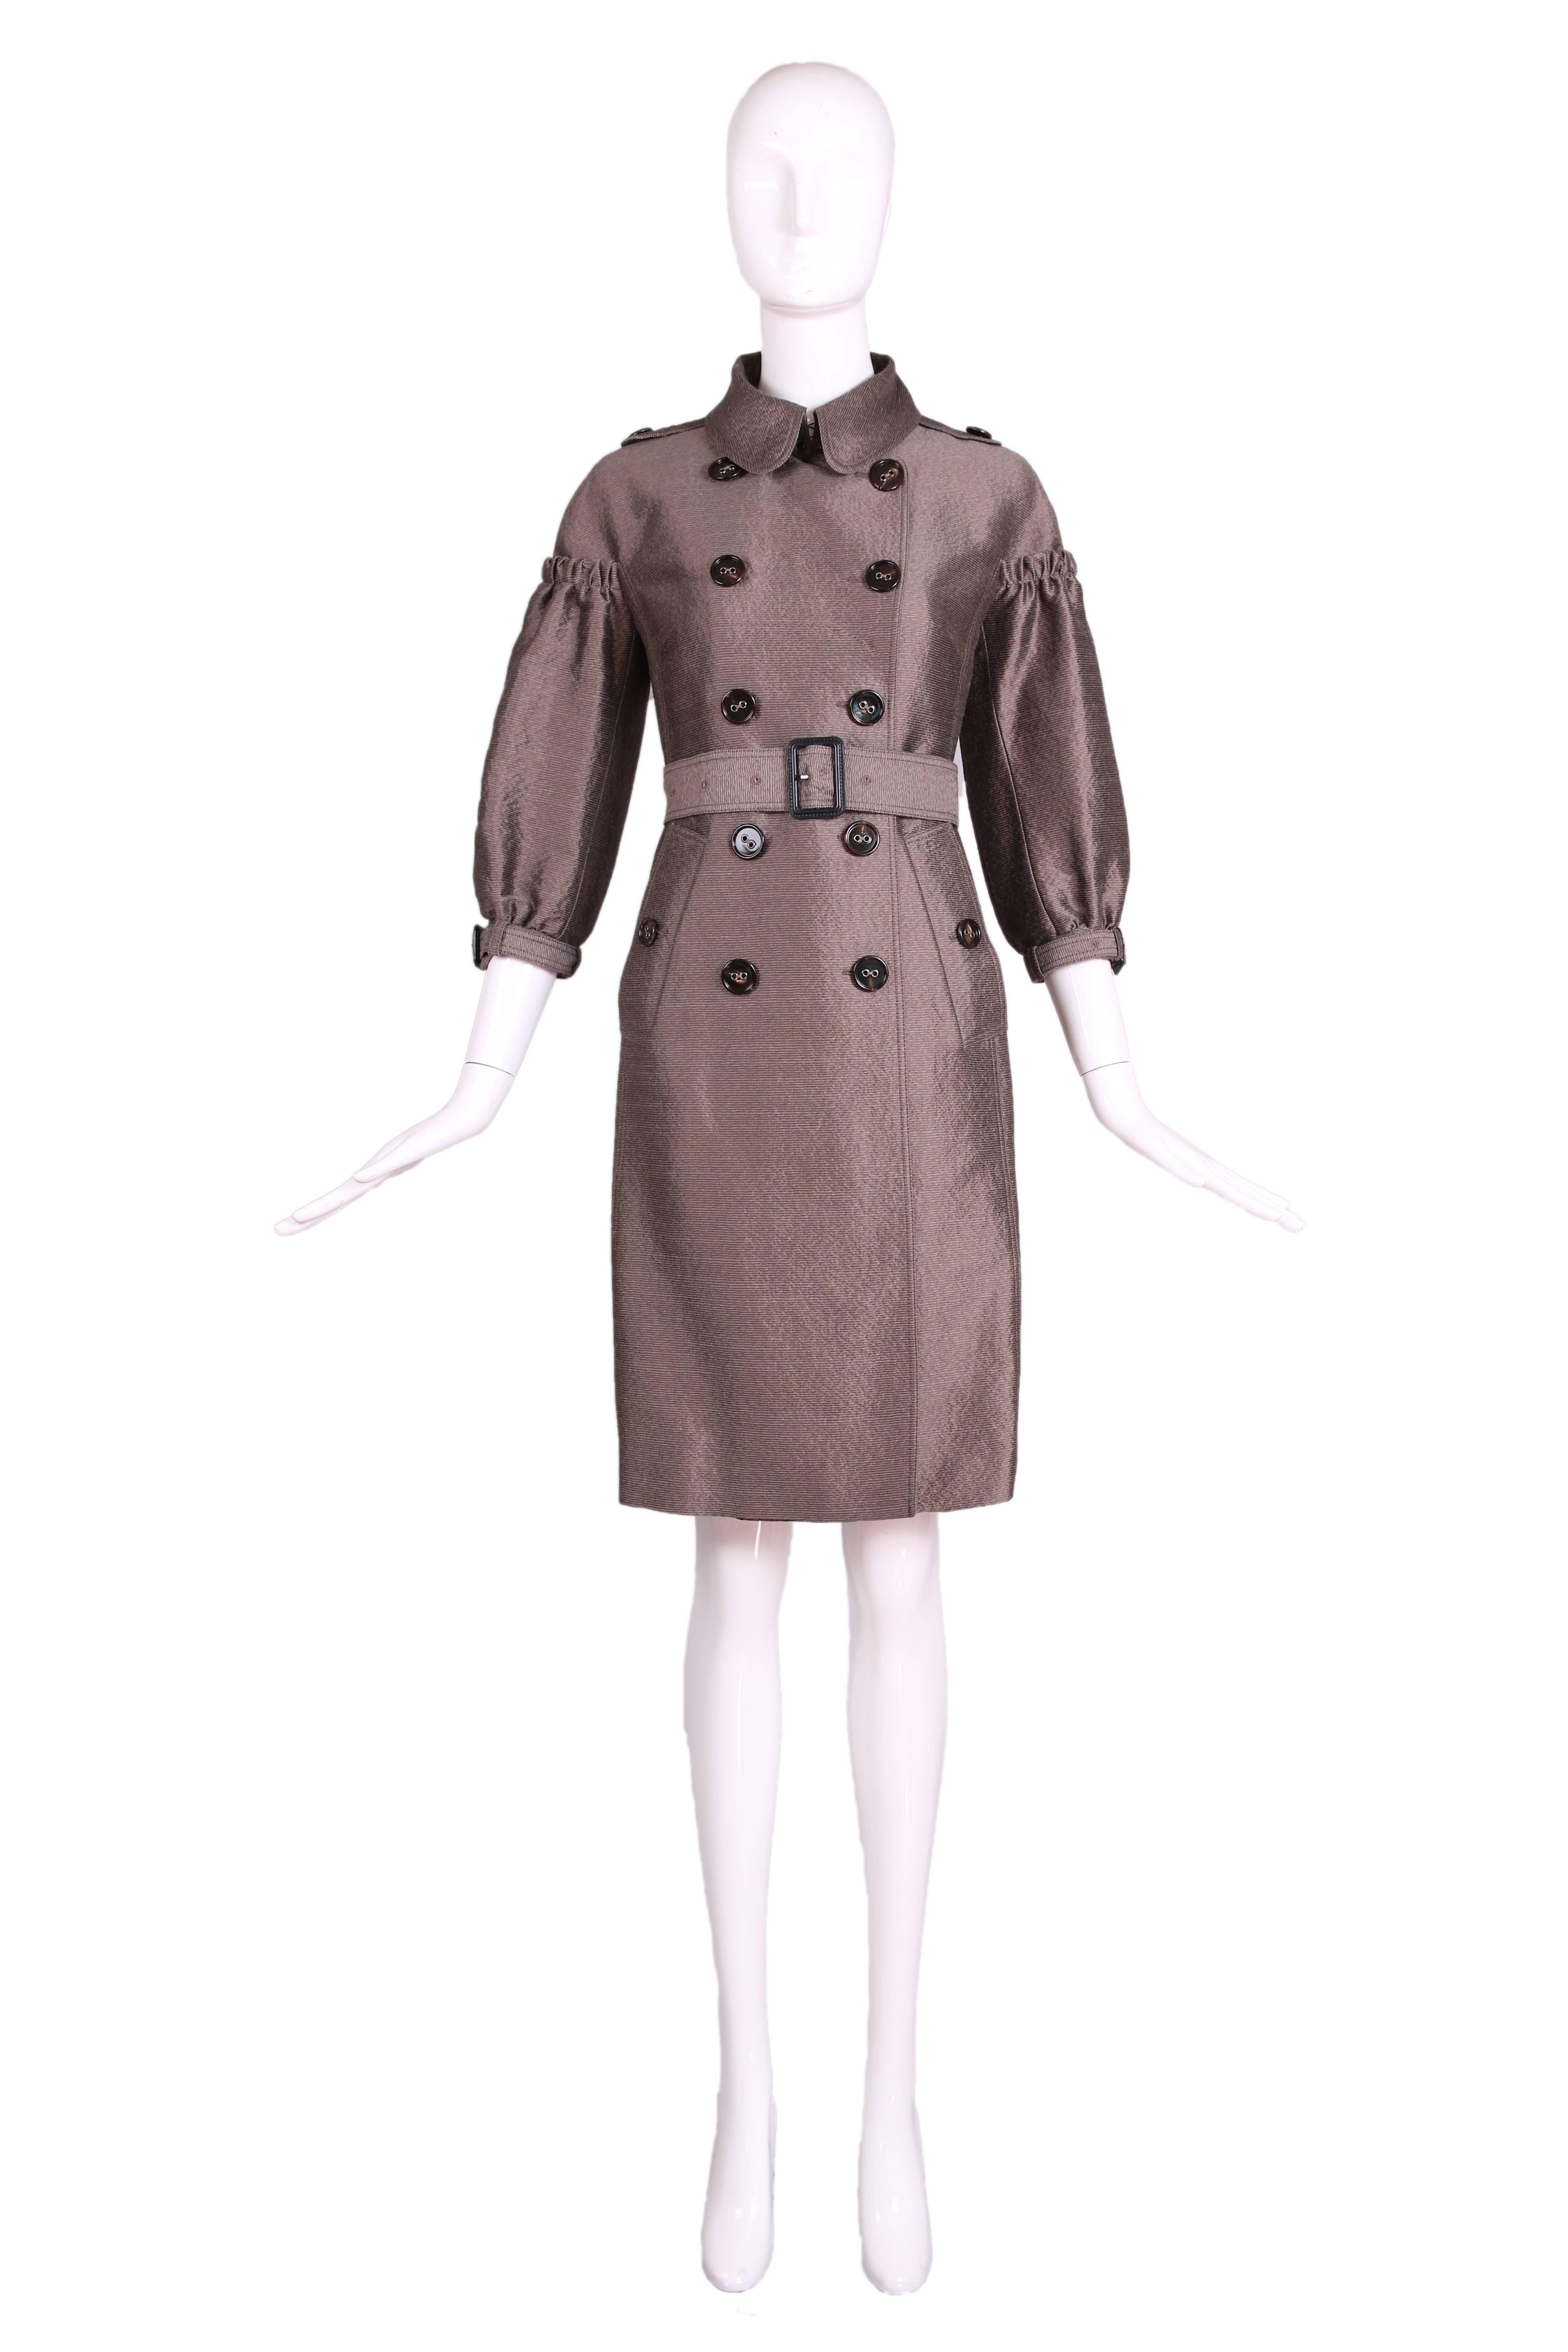 Burberry Porsum mocha colored trench coat with belt, 3/4 puffed sleeves and buttons down the front. Fabric is a silk and wool blend. Size tag 38 - please consult measurements. Coat is in excellent condition - missing a button at the